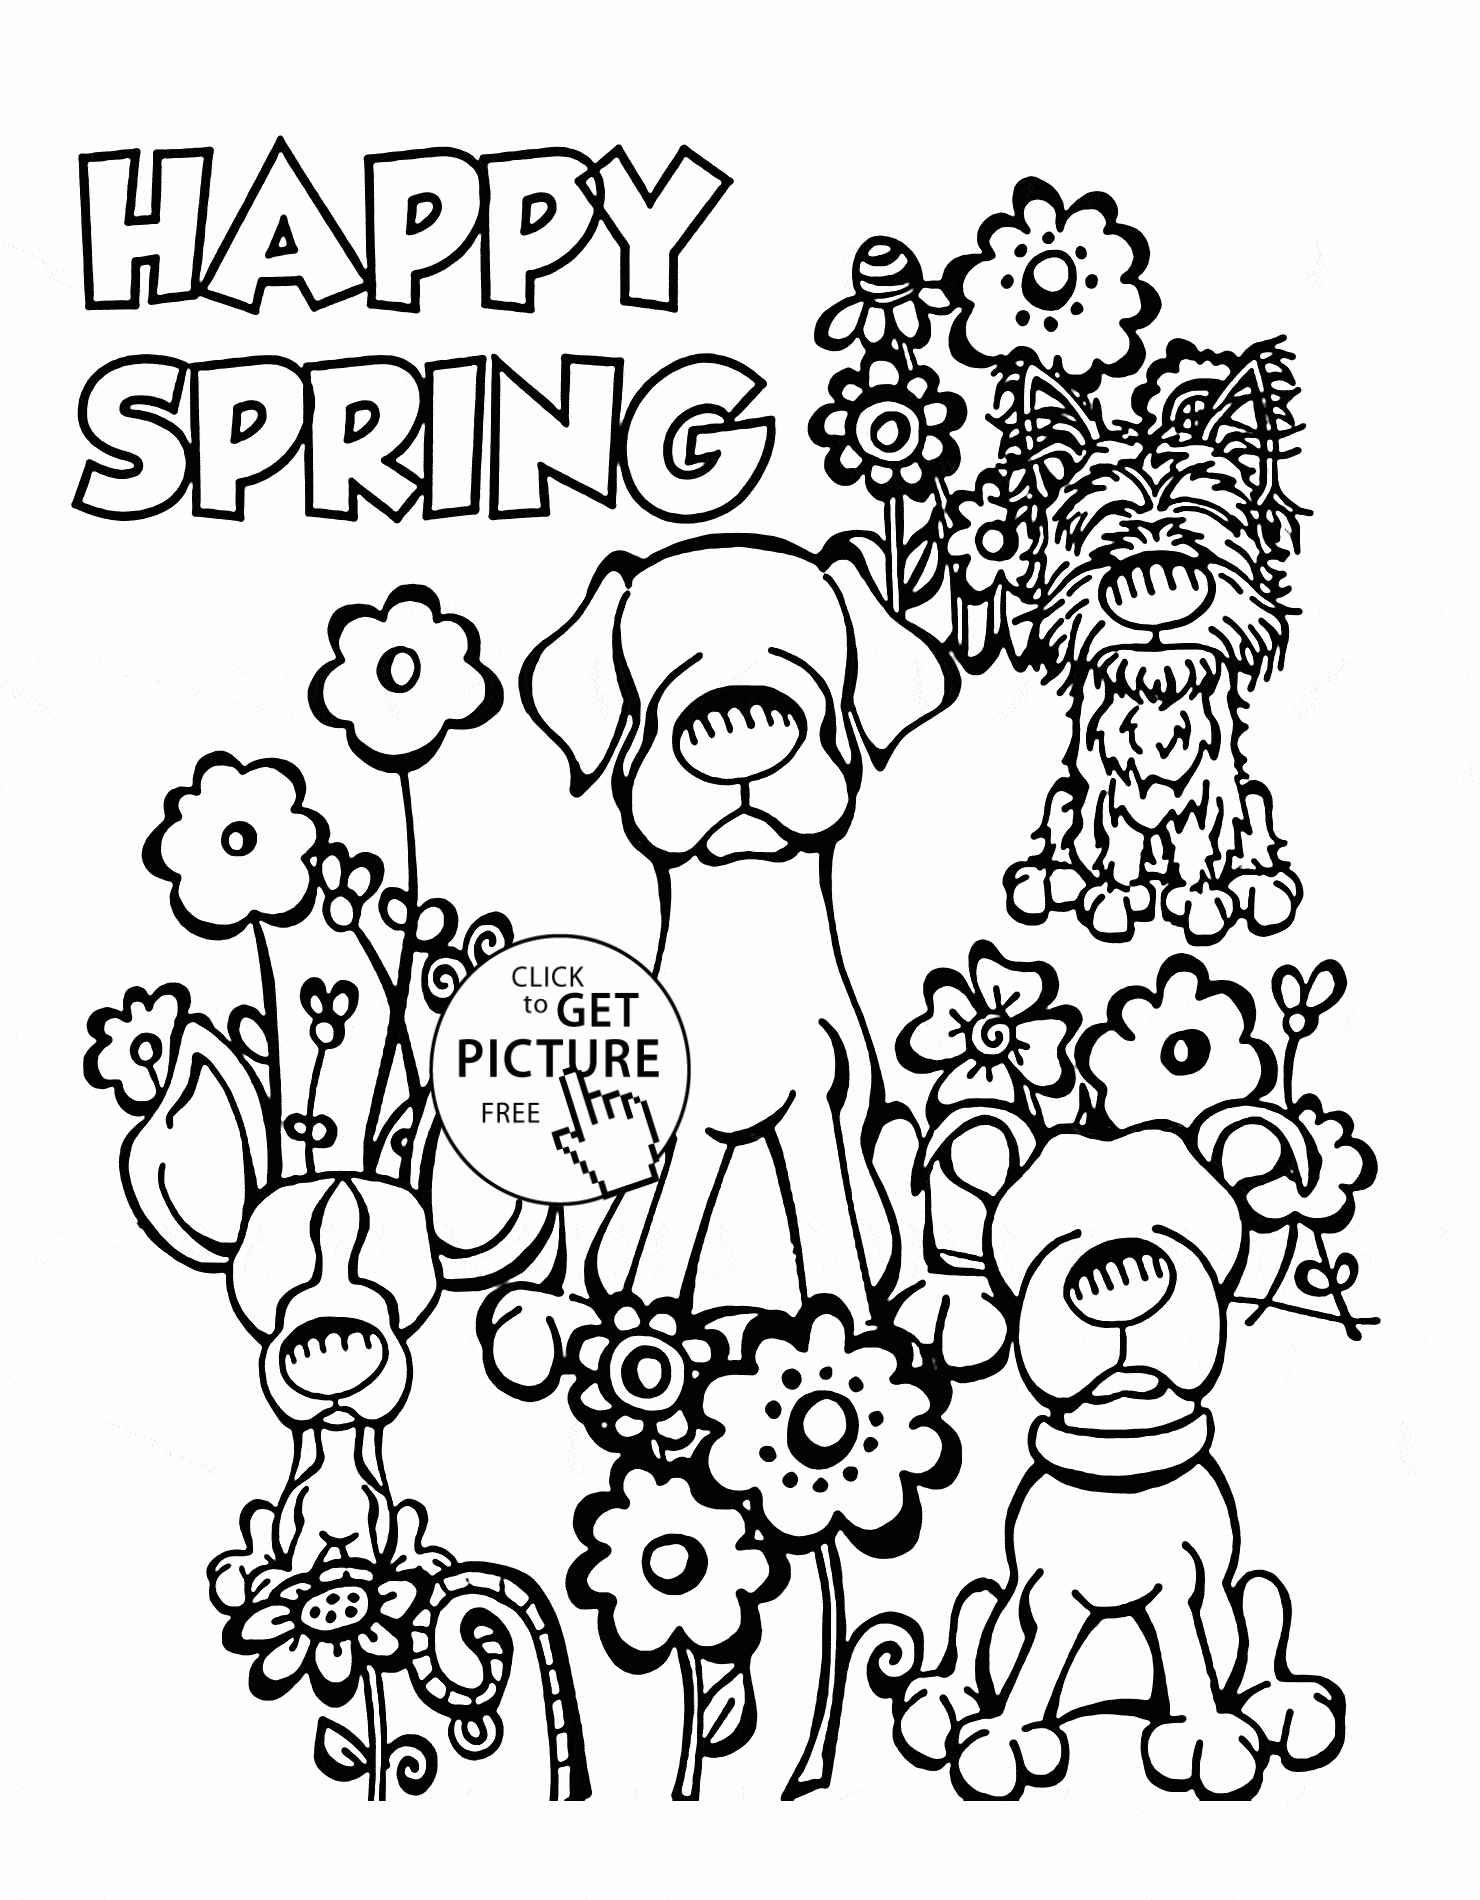 Spring Coloring Pages Spring Coloring Sheets New Coloring Page Free Spring Coloring Pages